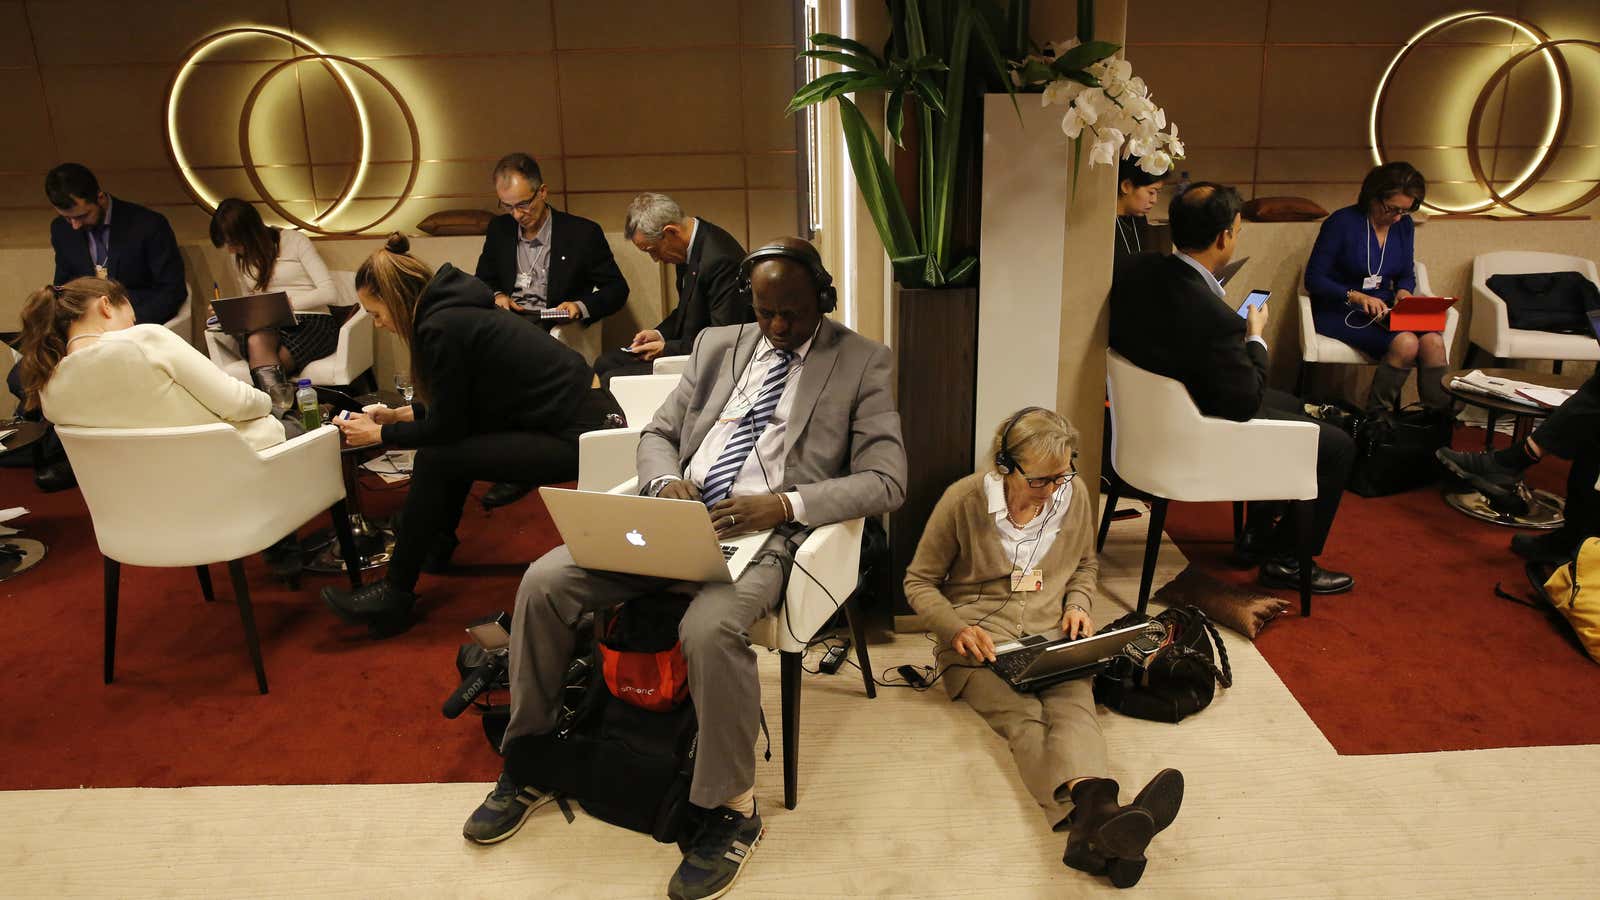 Participants use their smart phones and laptops between sessions during the annual meeting of the World Economic Forum (WEF) in Davos, Switzerland January 22, 2016.…